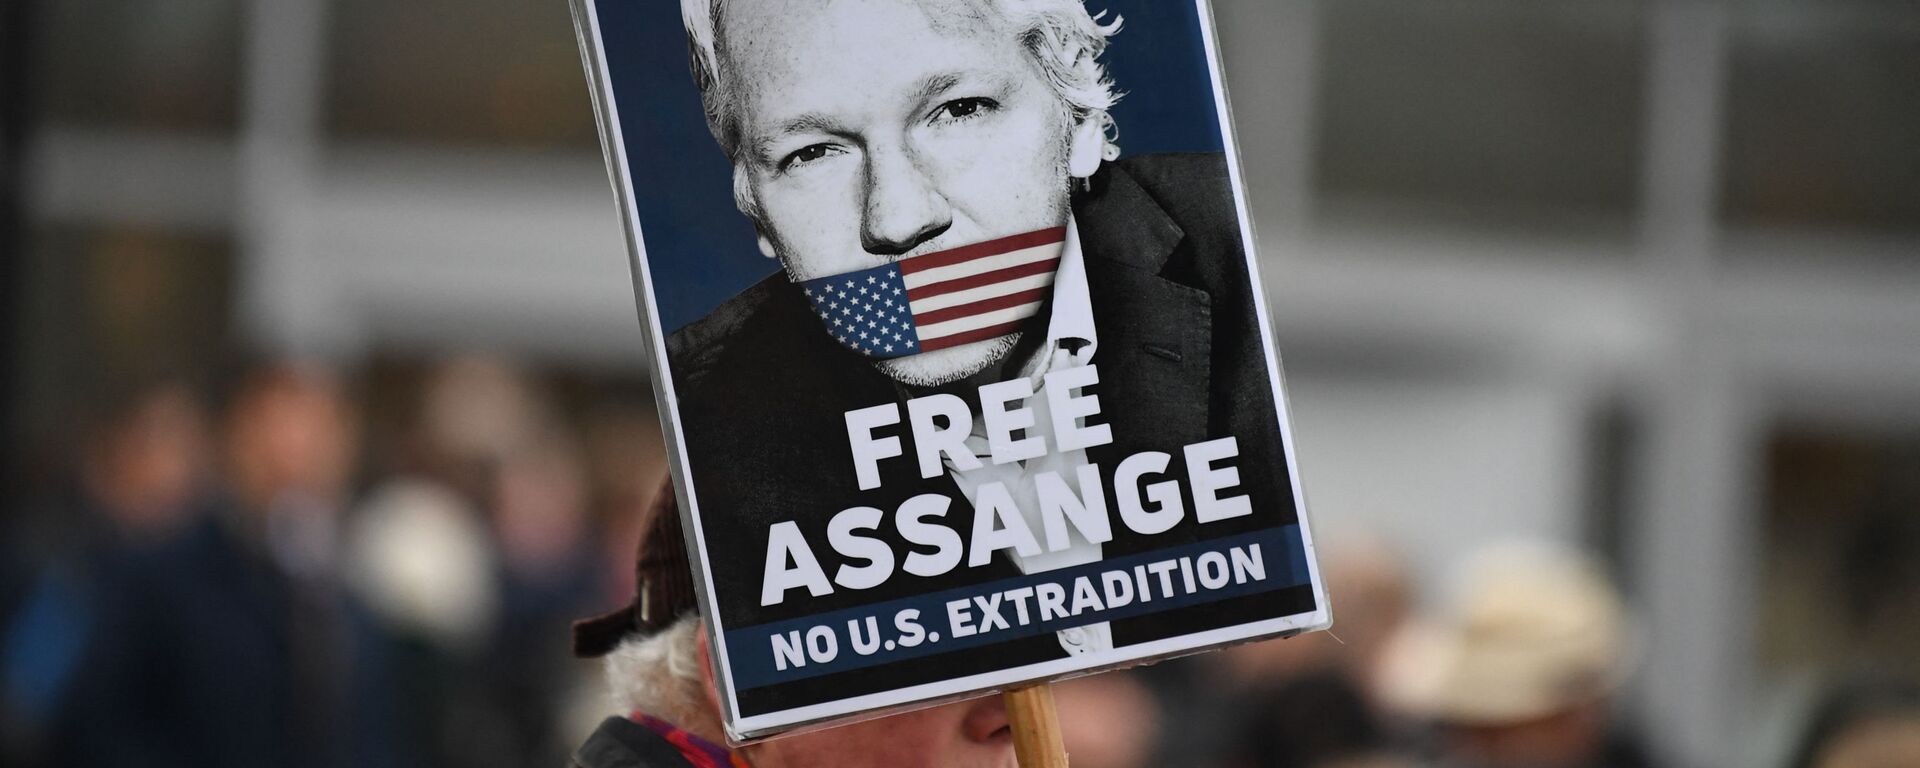 A supporter of WikiLeaks founder Julian Assange holds a placard calling for his freedom outside Woolwich Crown Court and HMP Belmarsh prison in southeast London on February 24, 2020, ahead of the opening of the trial to hear a US request for Assange's extradition - Sputnik International, 1920, 03.01.2022